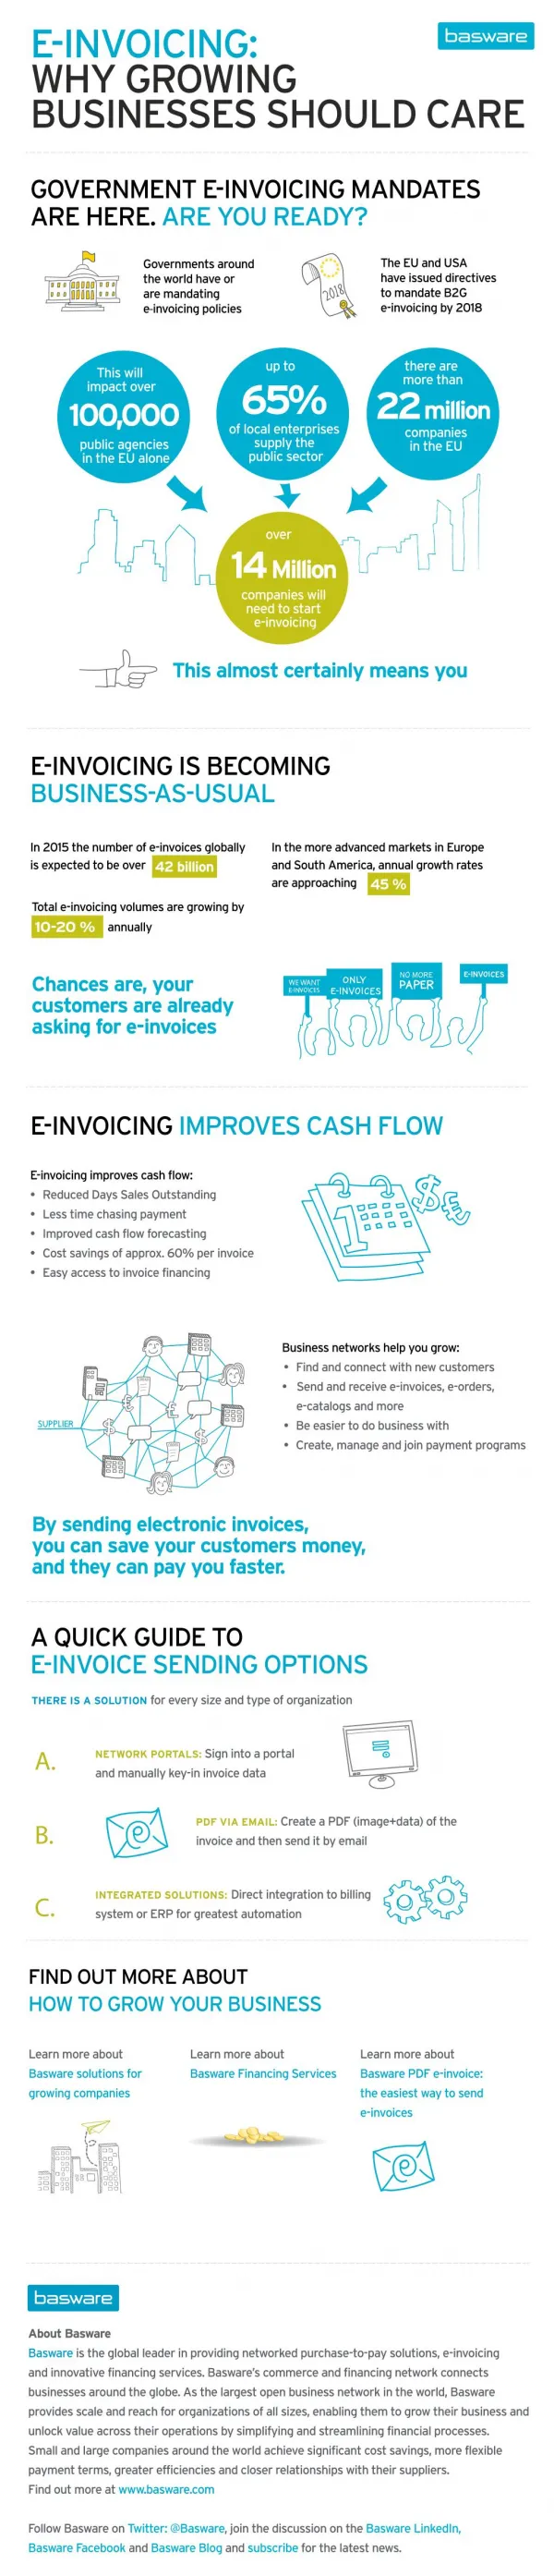 e-Invoicing: Why Growing Businesses Should Care